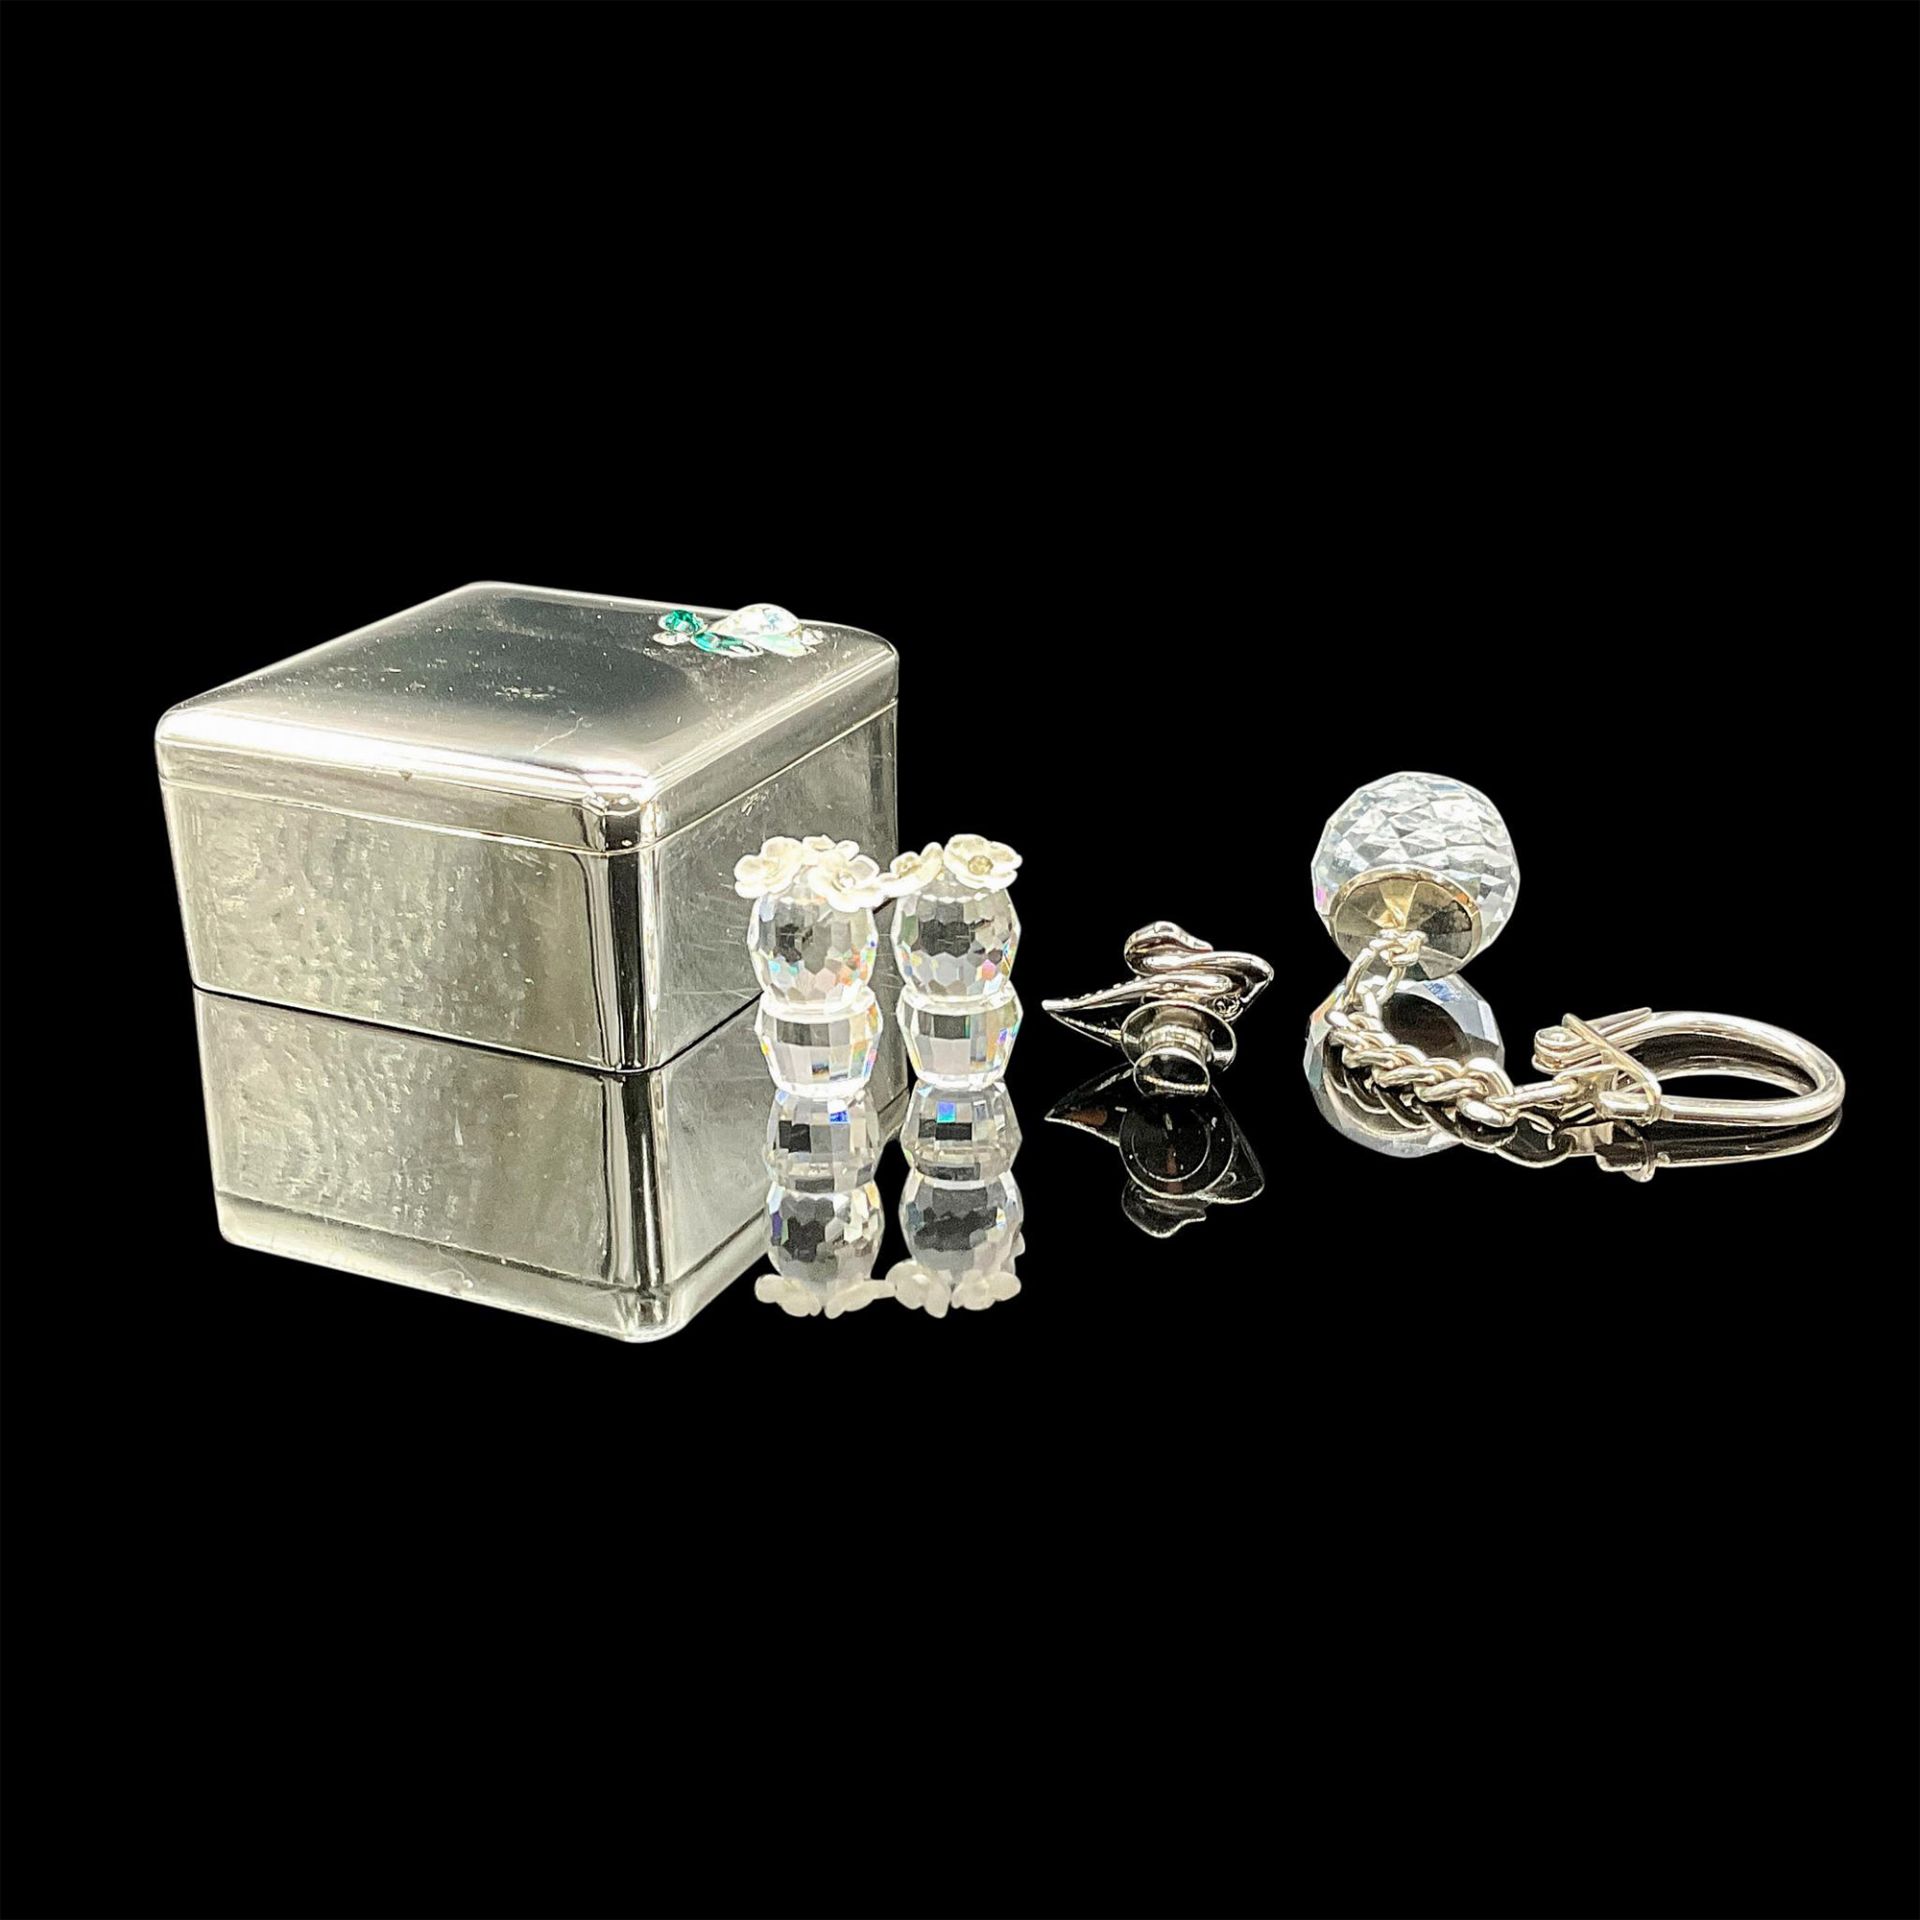 5pc Swarovski Crystal Pieces with Small Ring Box - Image 2 of 3